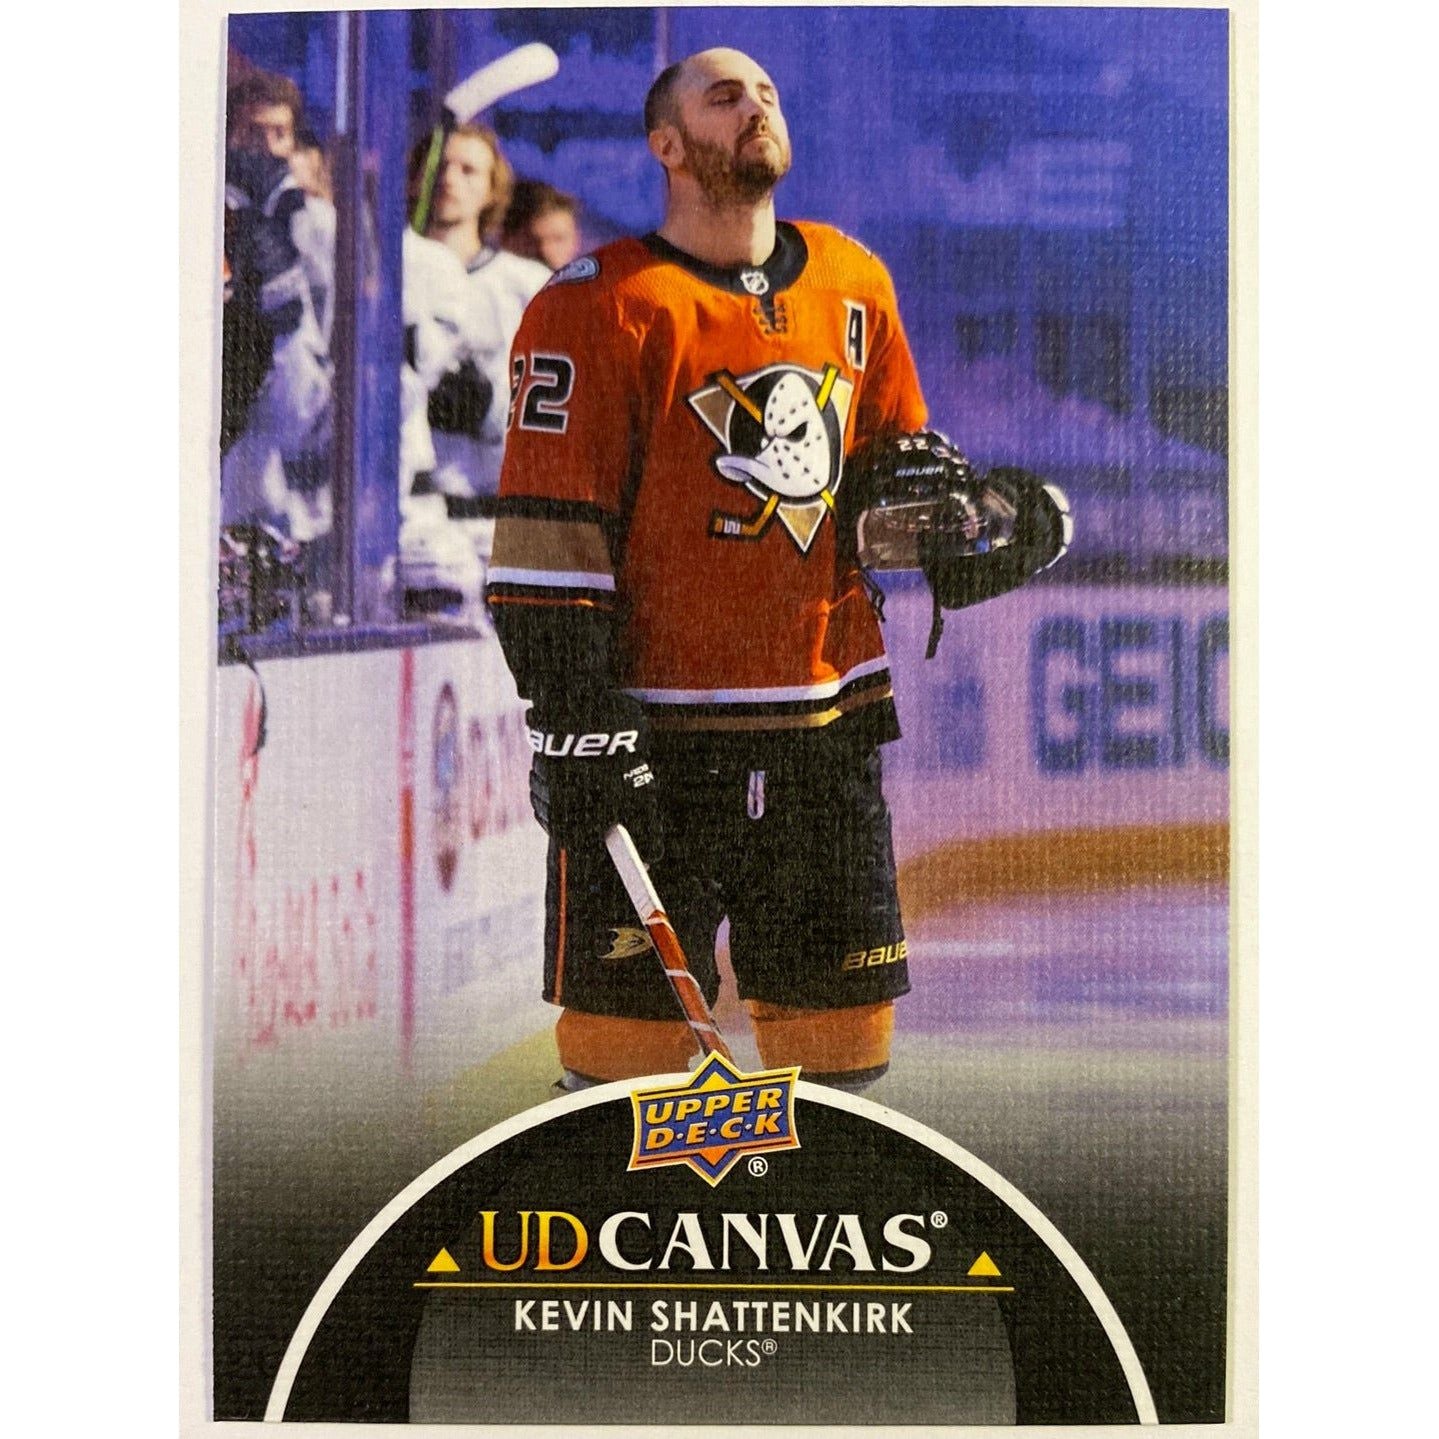  2021-22 Upper Deck Series 1 Kevin Shattenkirk UD Canvas Black SP  Local Legends Cards & Collectibles